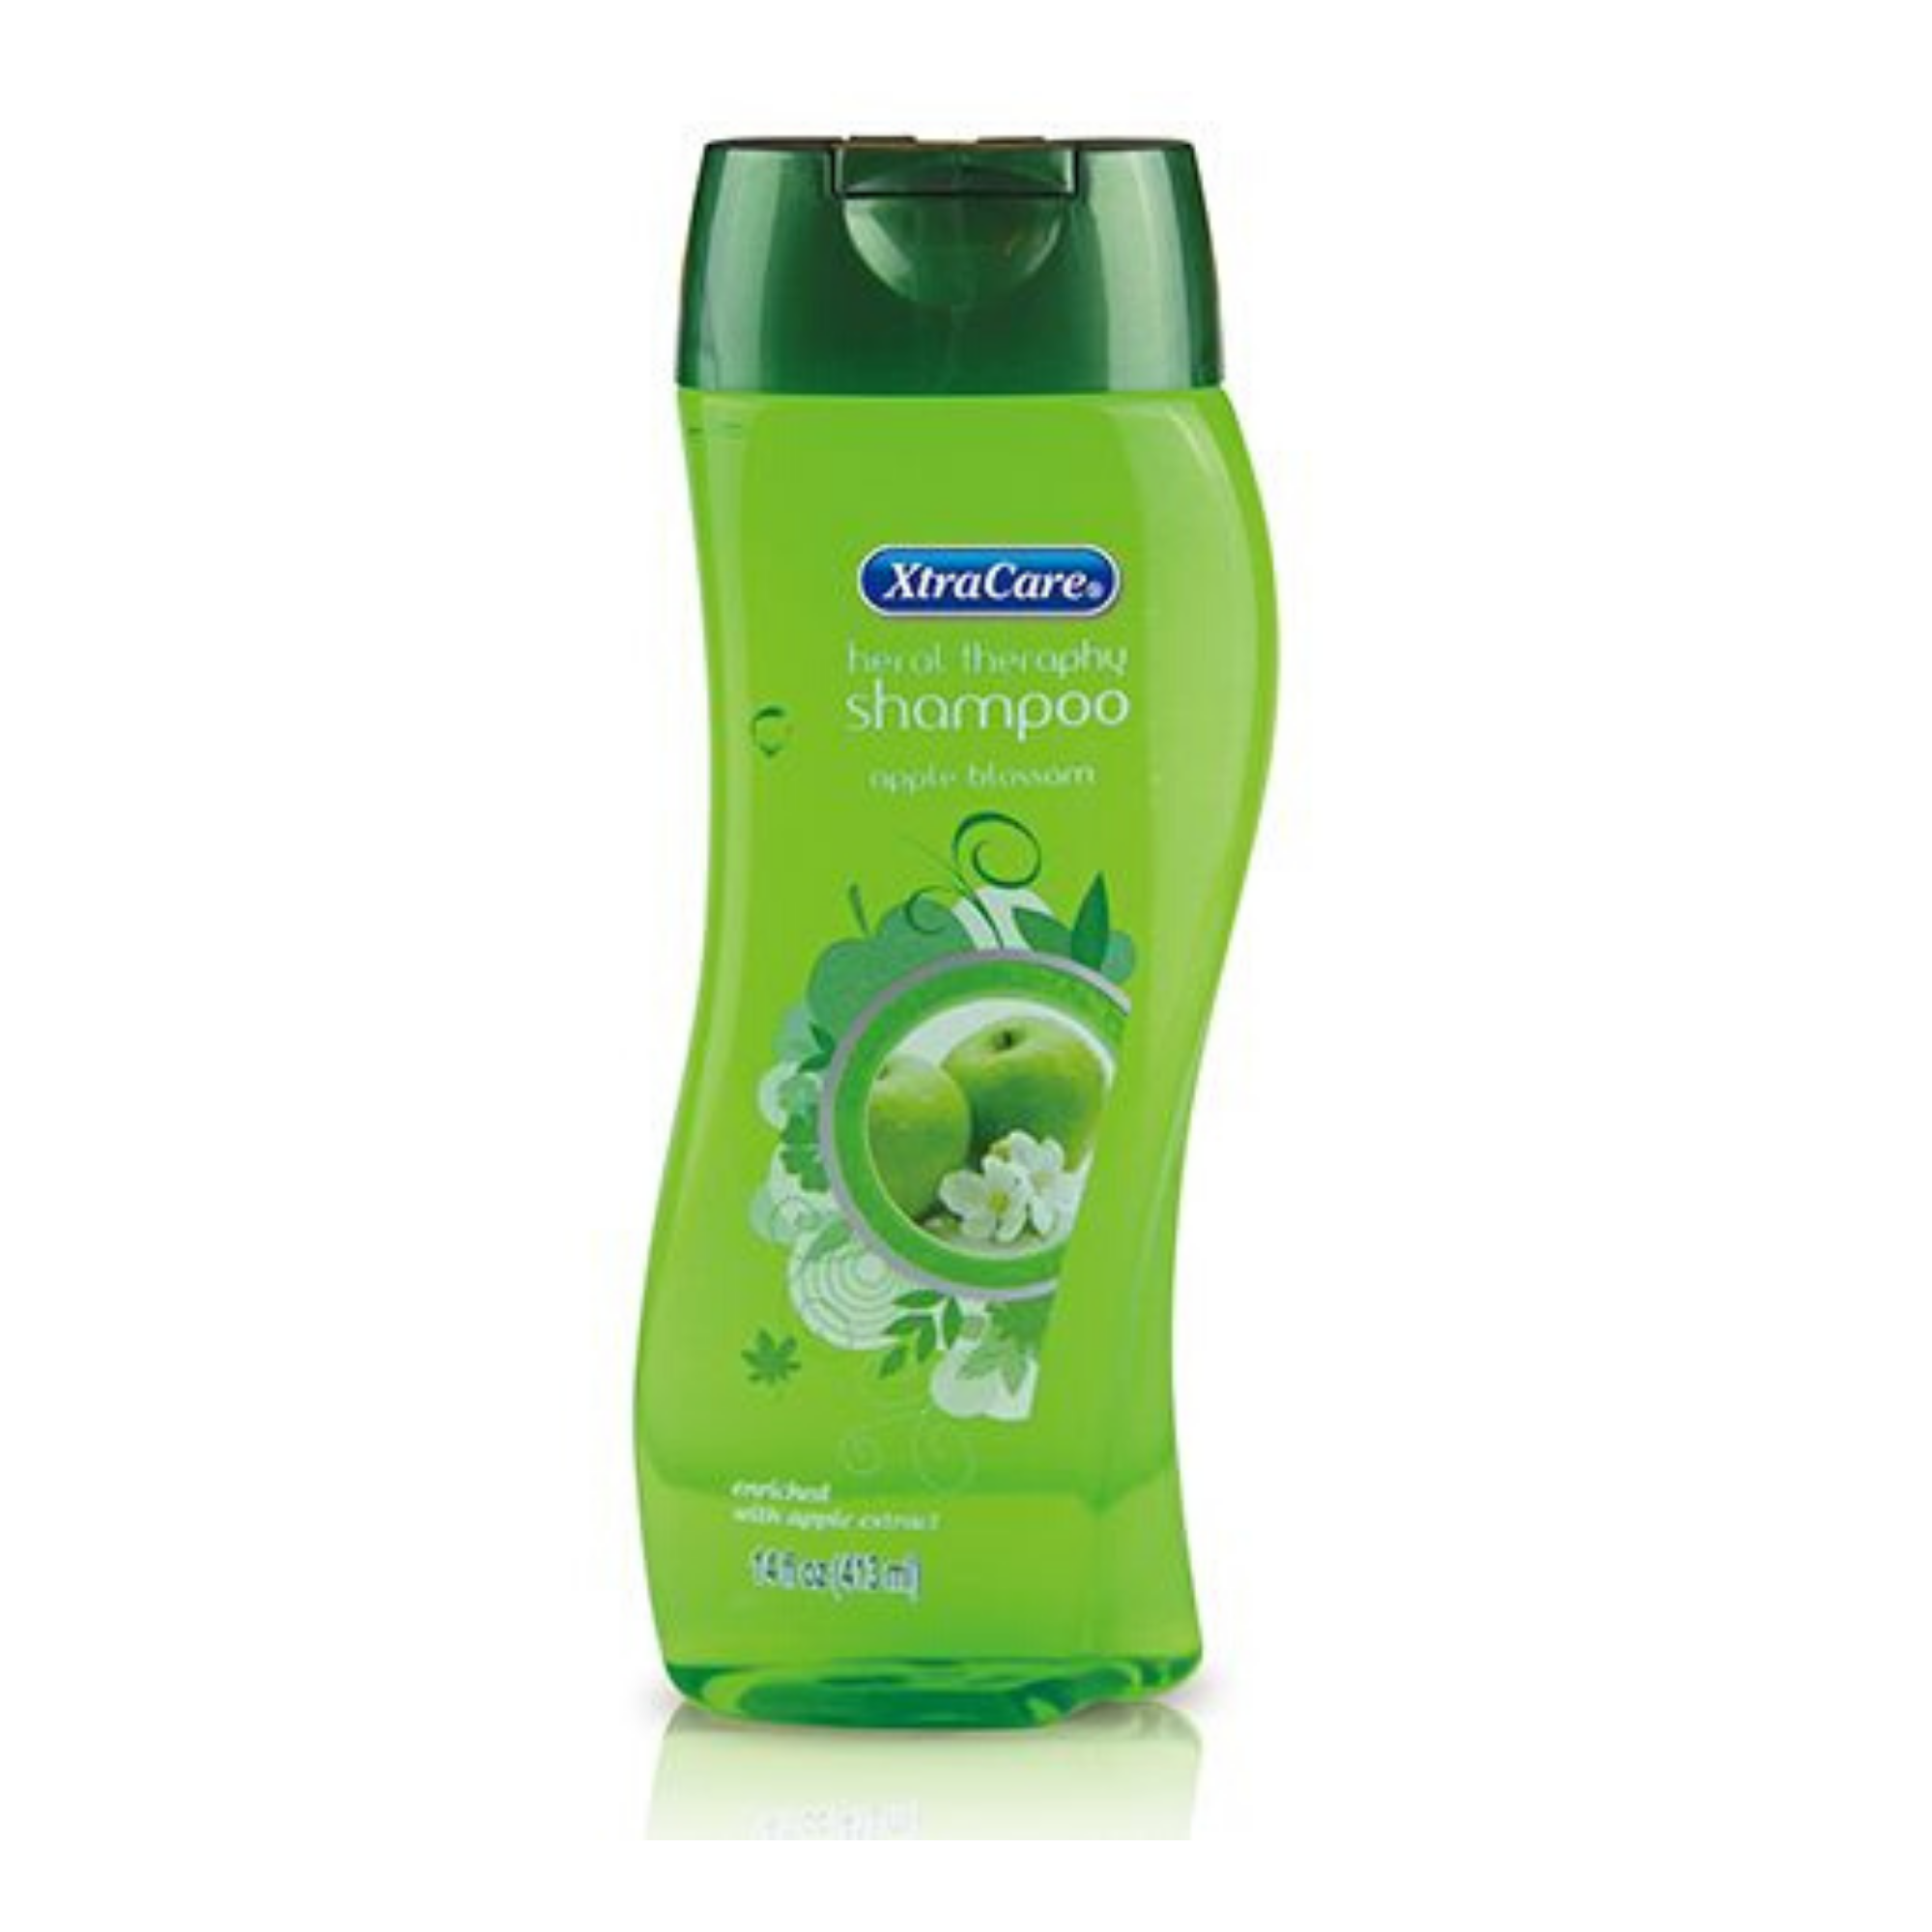 XtraCare Herbal Therapy Shampoo - Apple Blossom